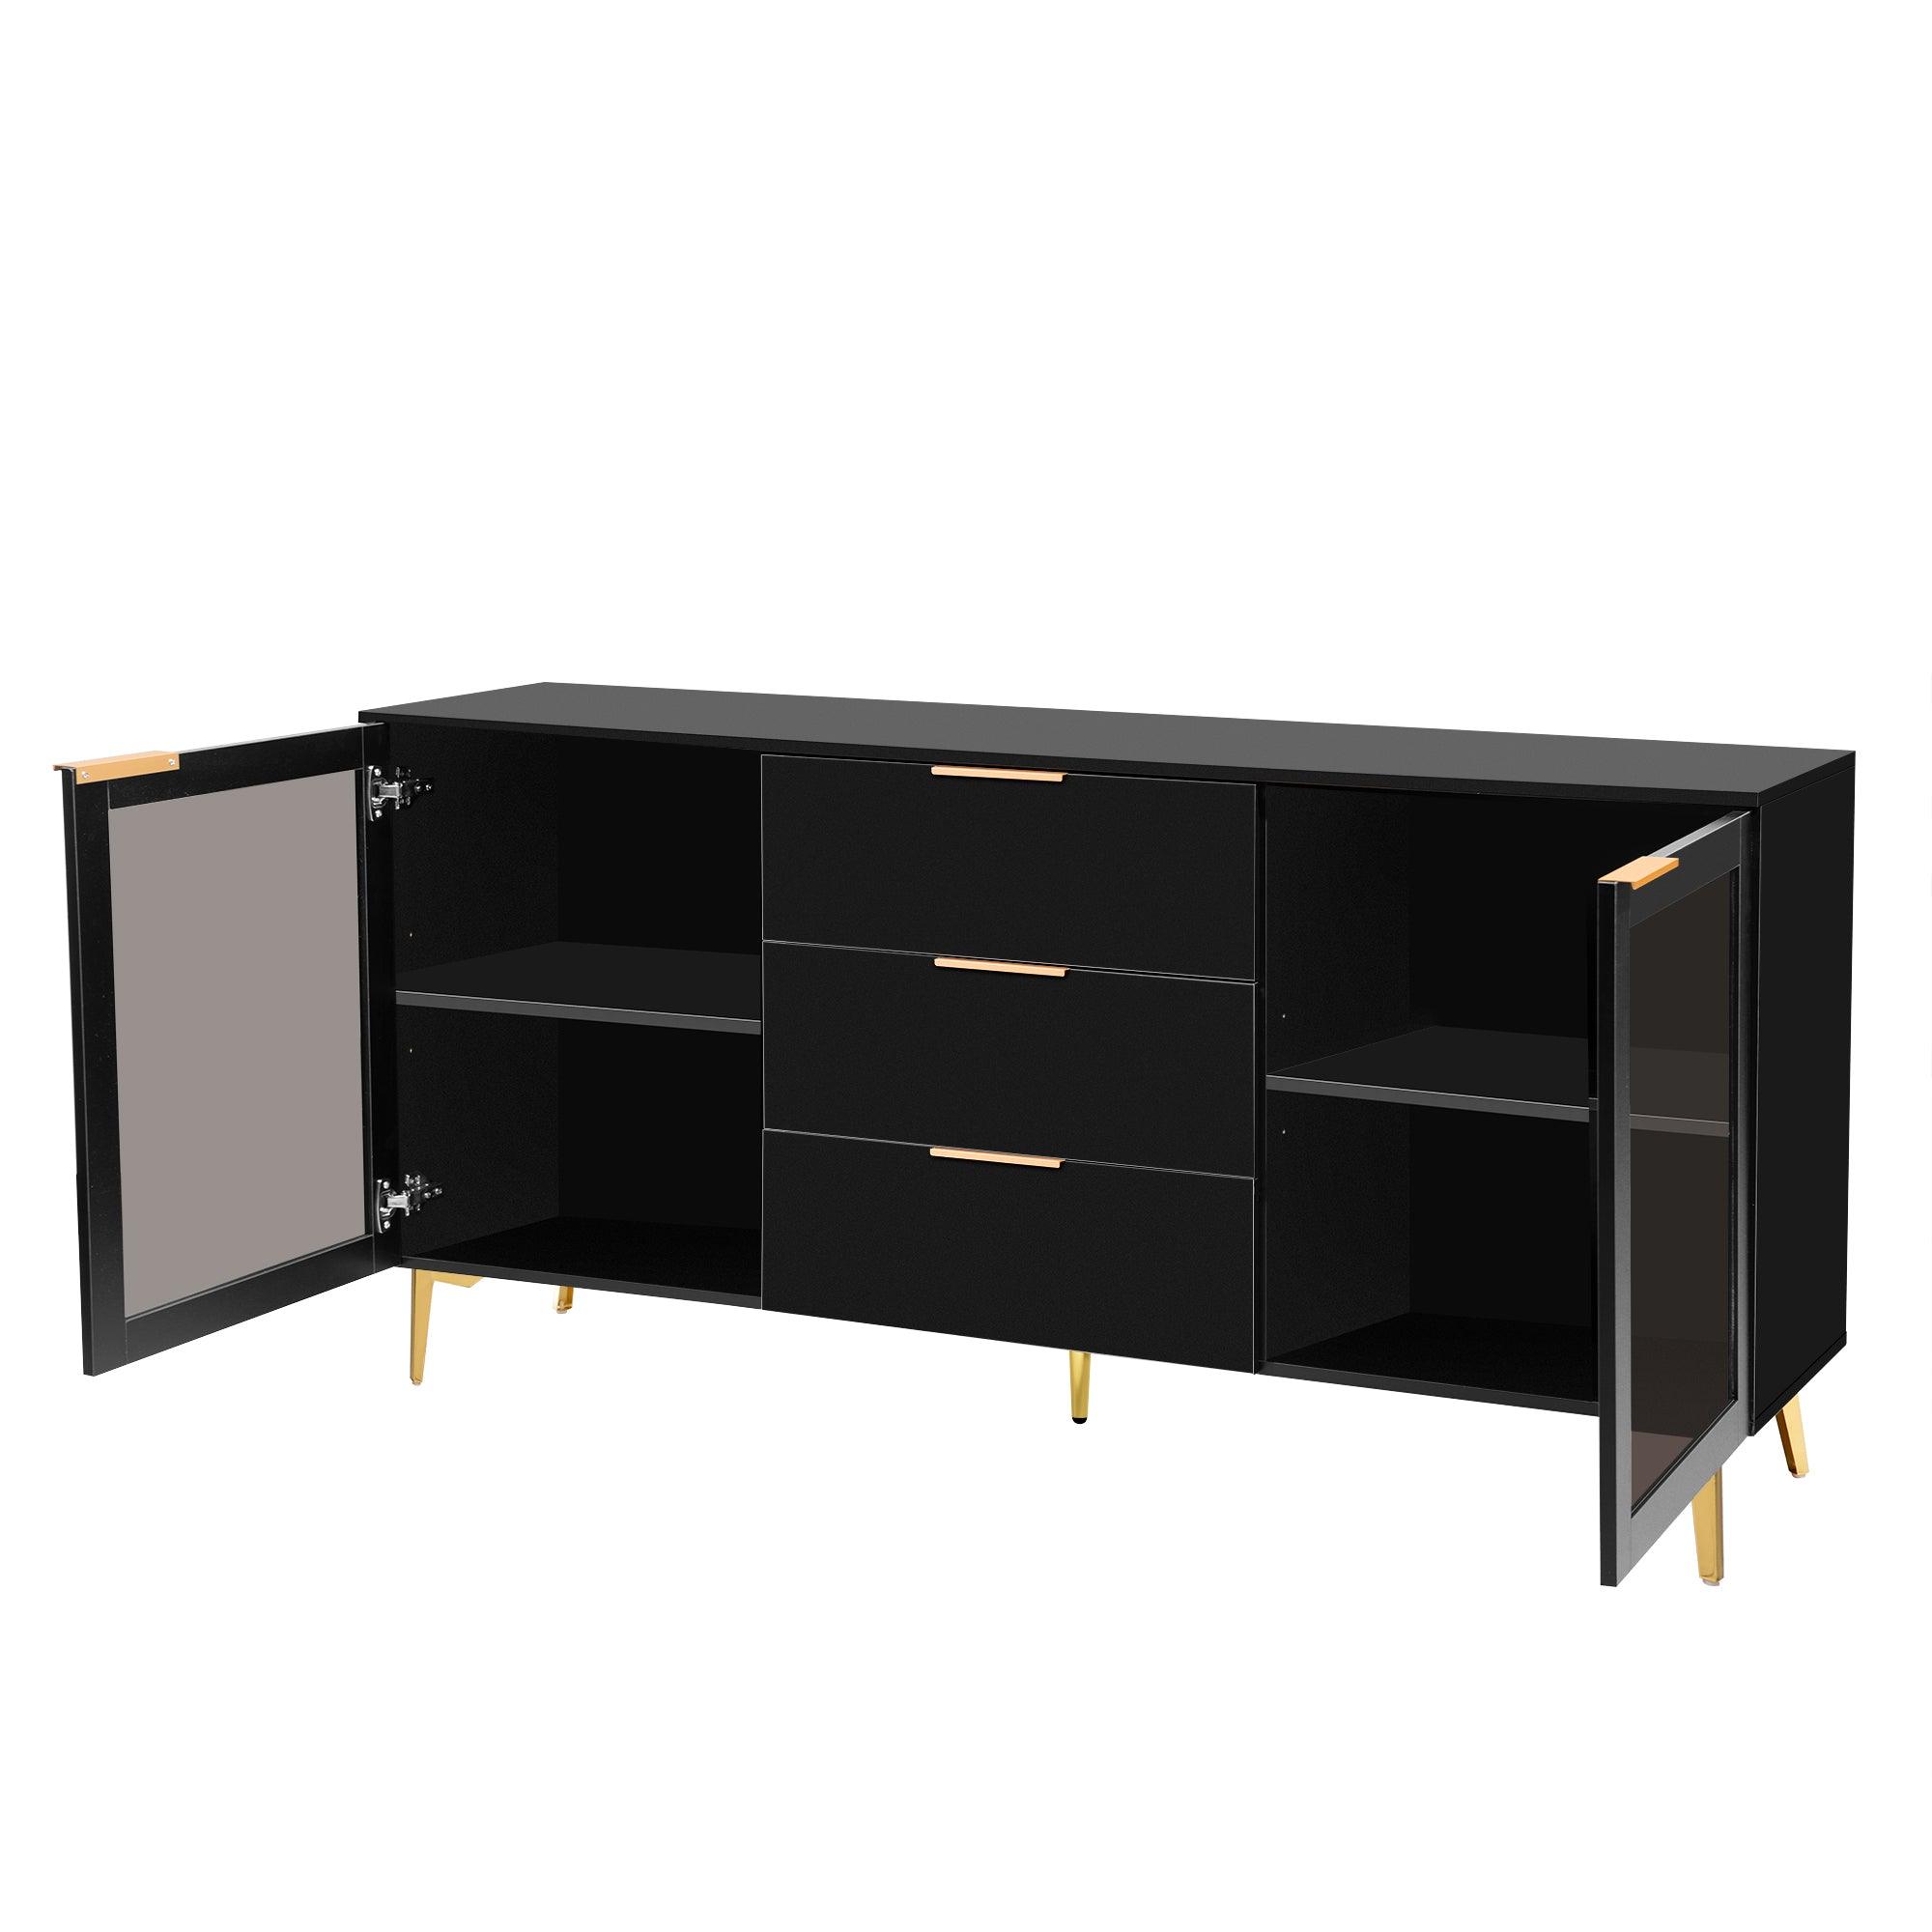 Featured Two-door Storage Cabinet with Three Drawers and Metal Handles , Suitable for Corridors, Entrances, Living rooms, and Bedrooms